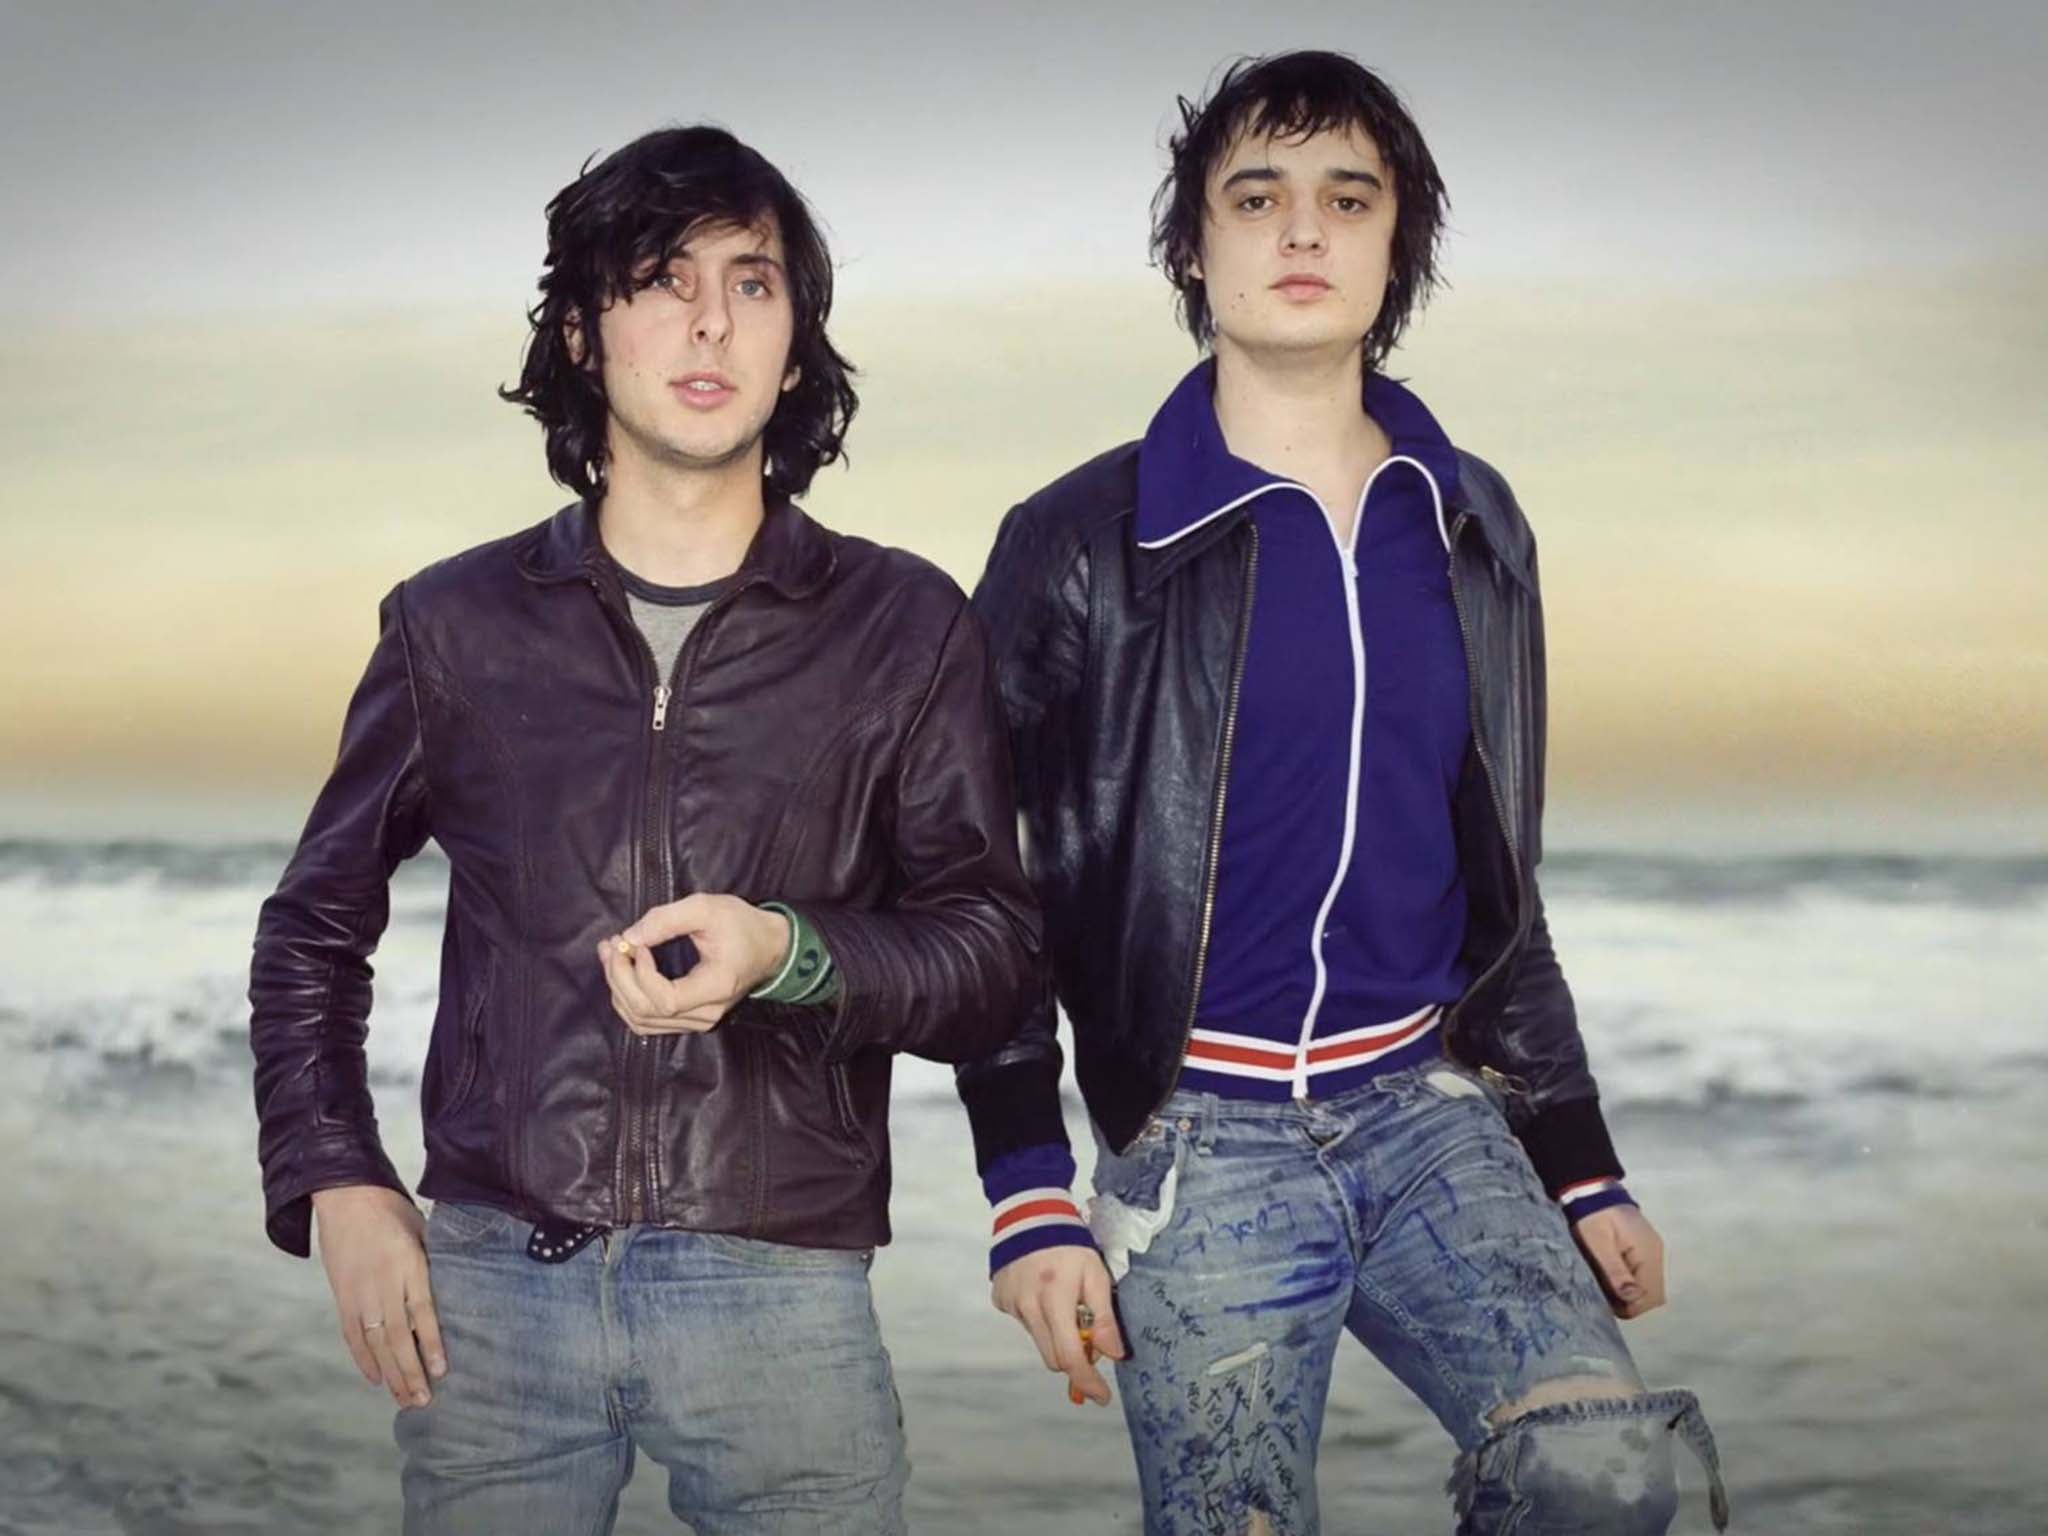 The Libertines Confirm New Short Film Coming Soon From Photographer 